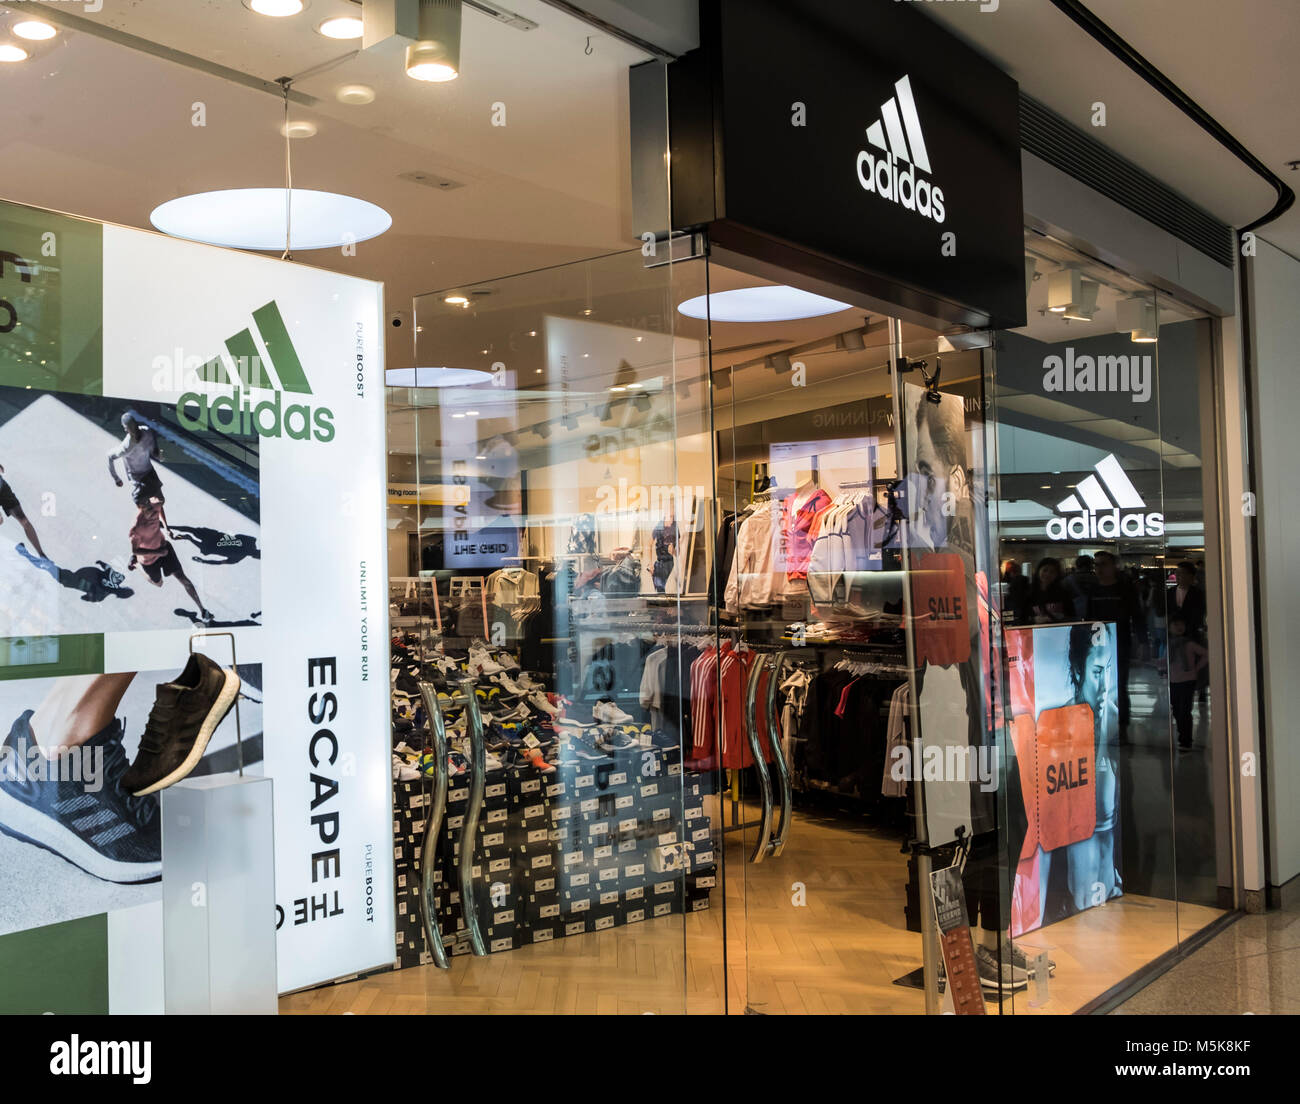 adidas outlet sale 2019